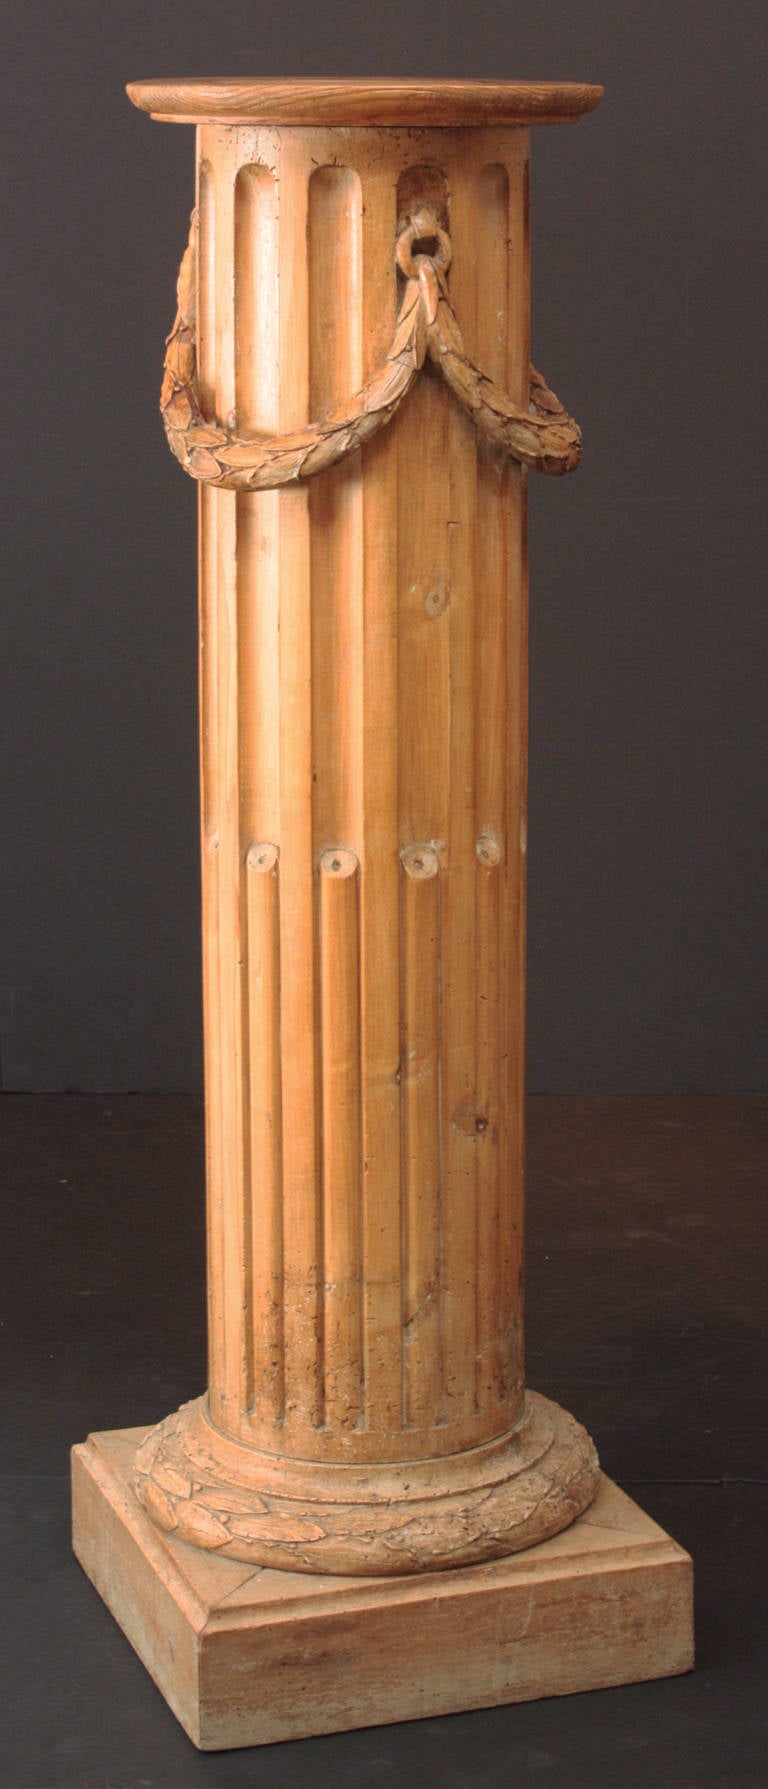 a large Georgian Revival fruit wood fluted pedestal with carved swags of laurel leaves and a laurel wreath base

base is 16.25